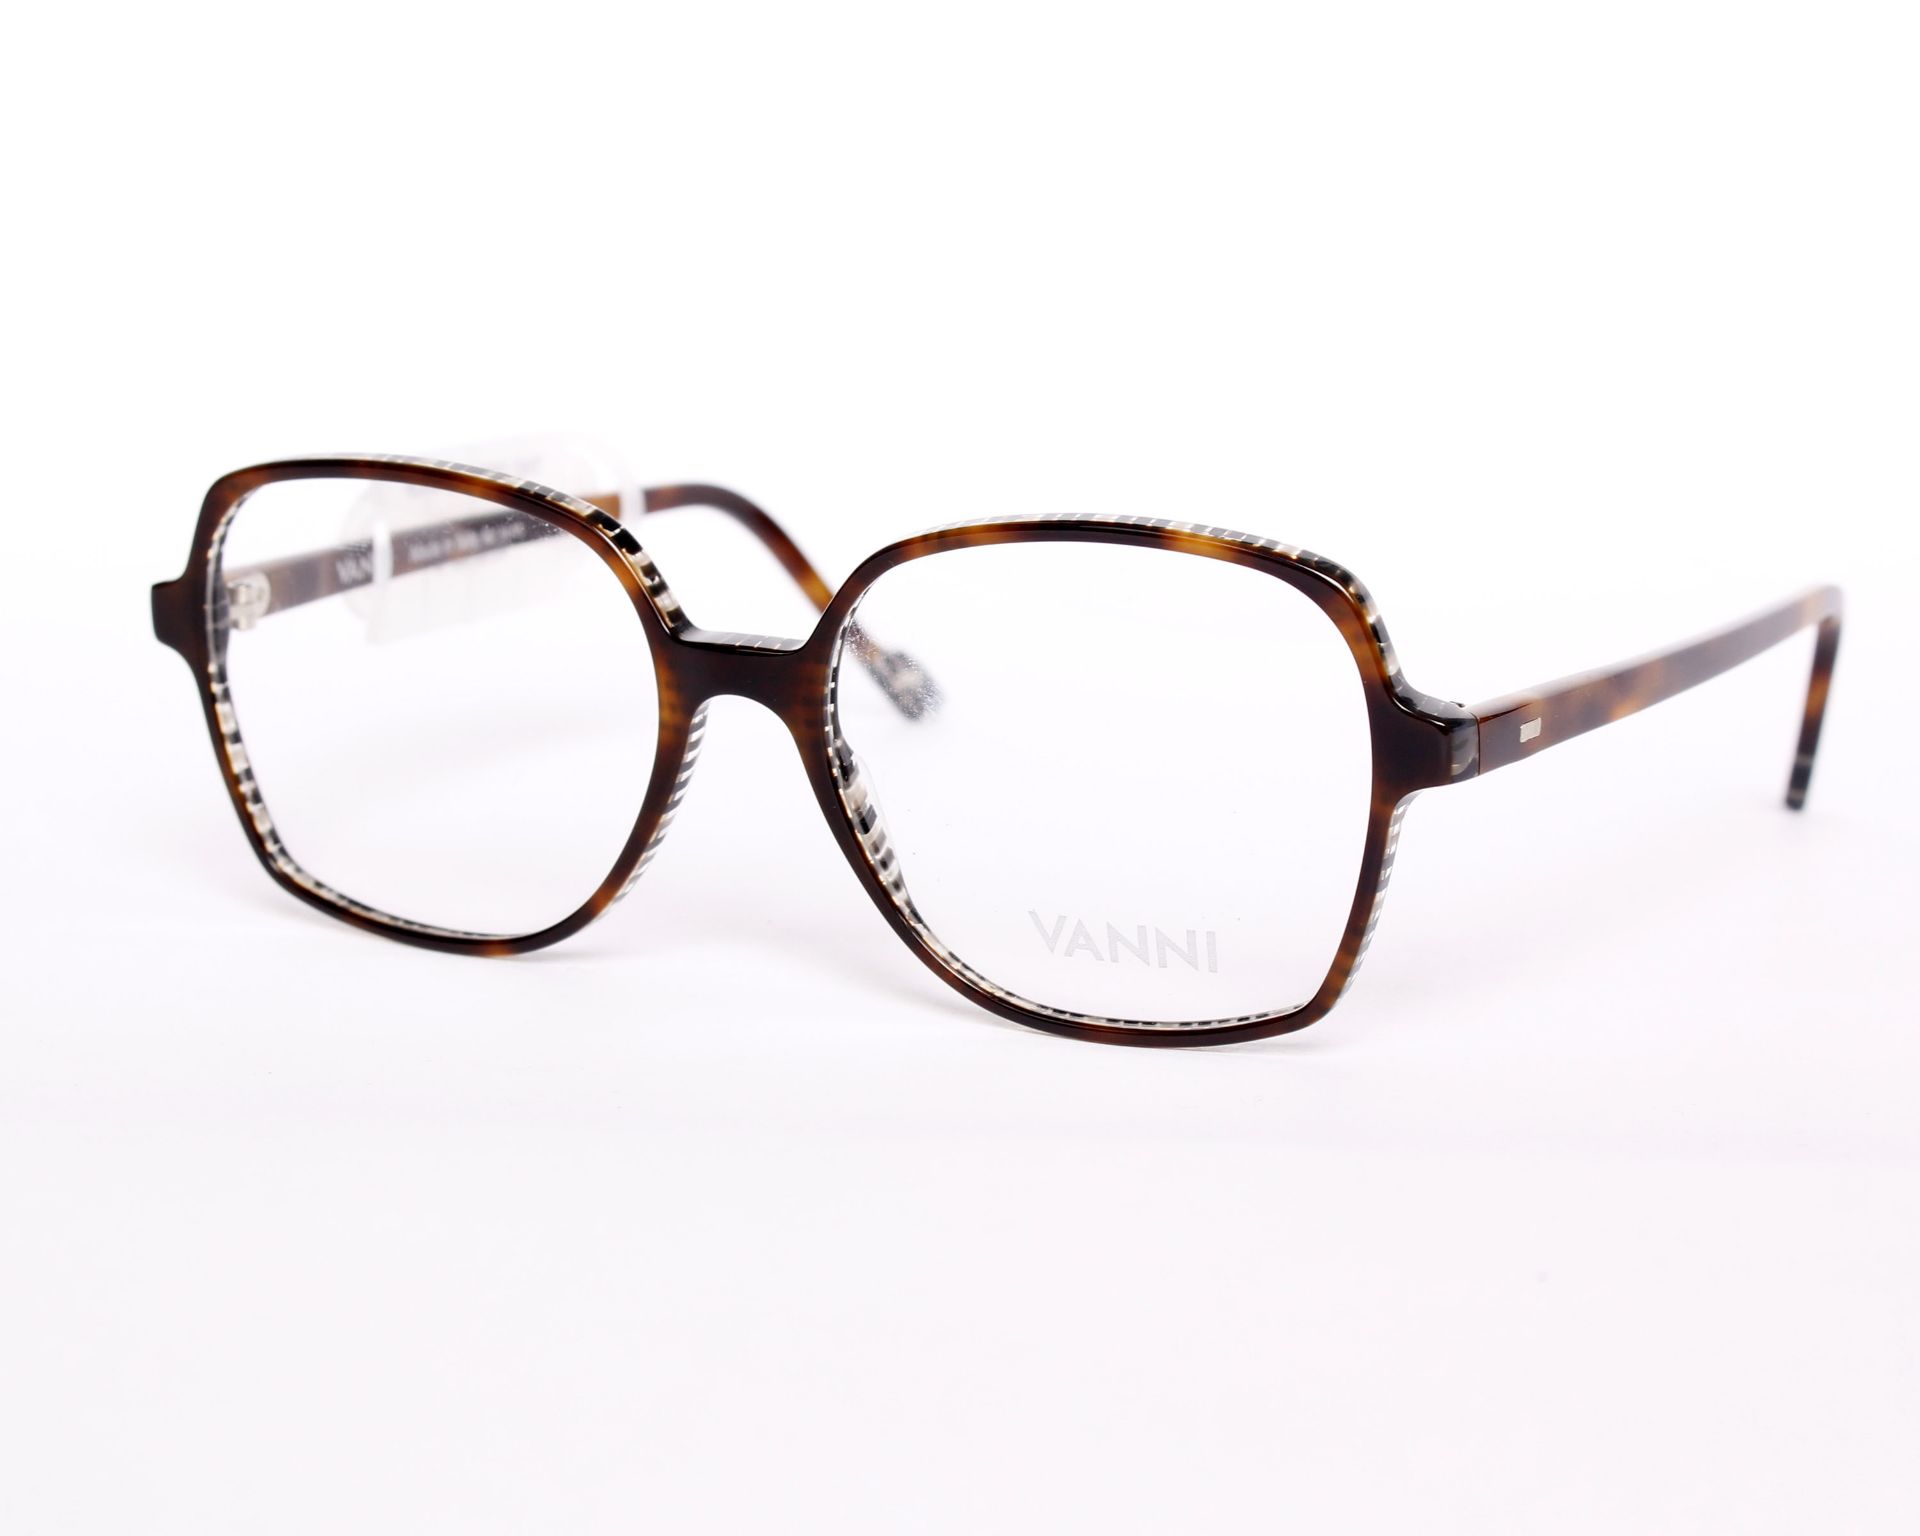 A pair of as new Vanni glasses frames with clear glass (RRP £220). - Image 3 of 3